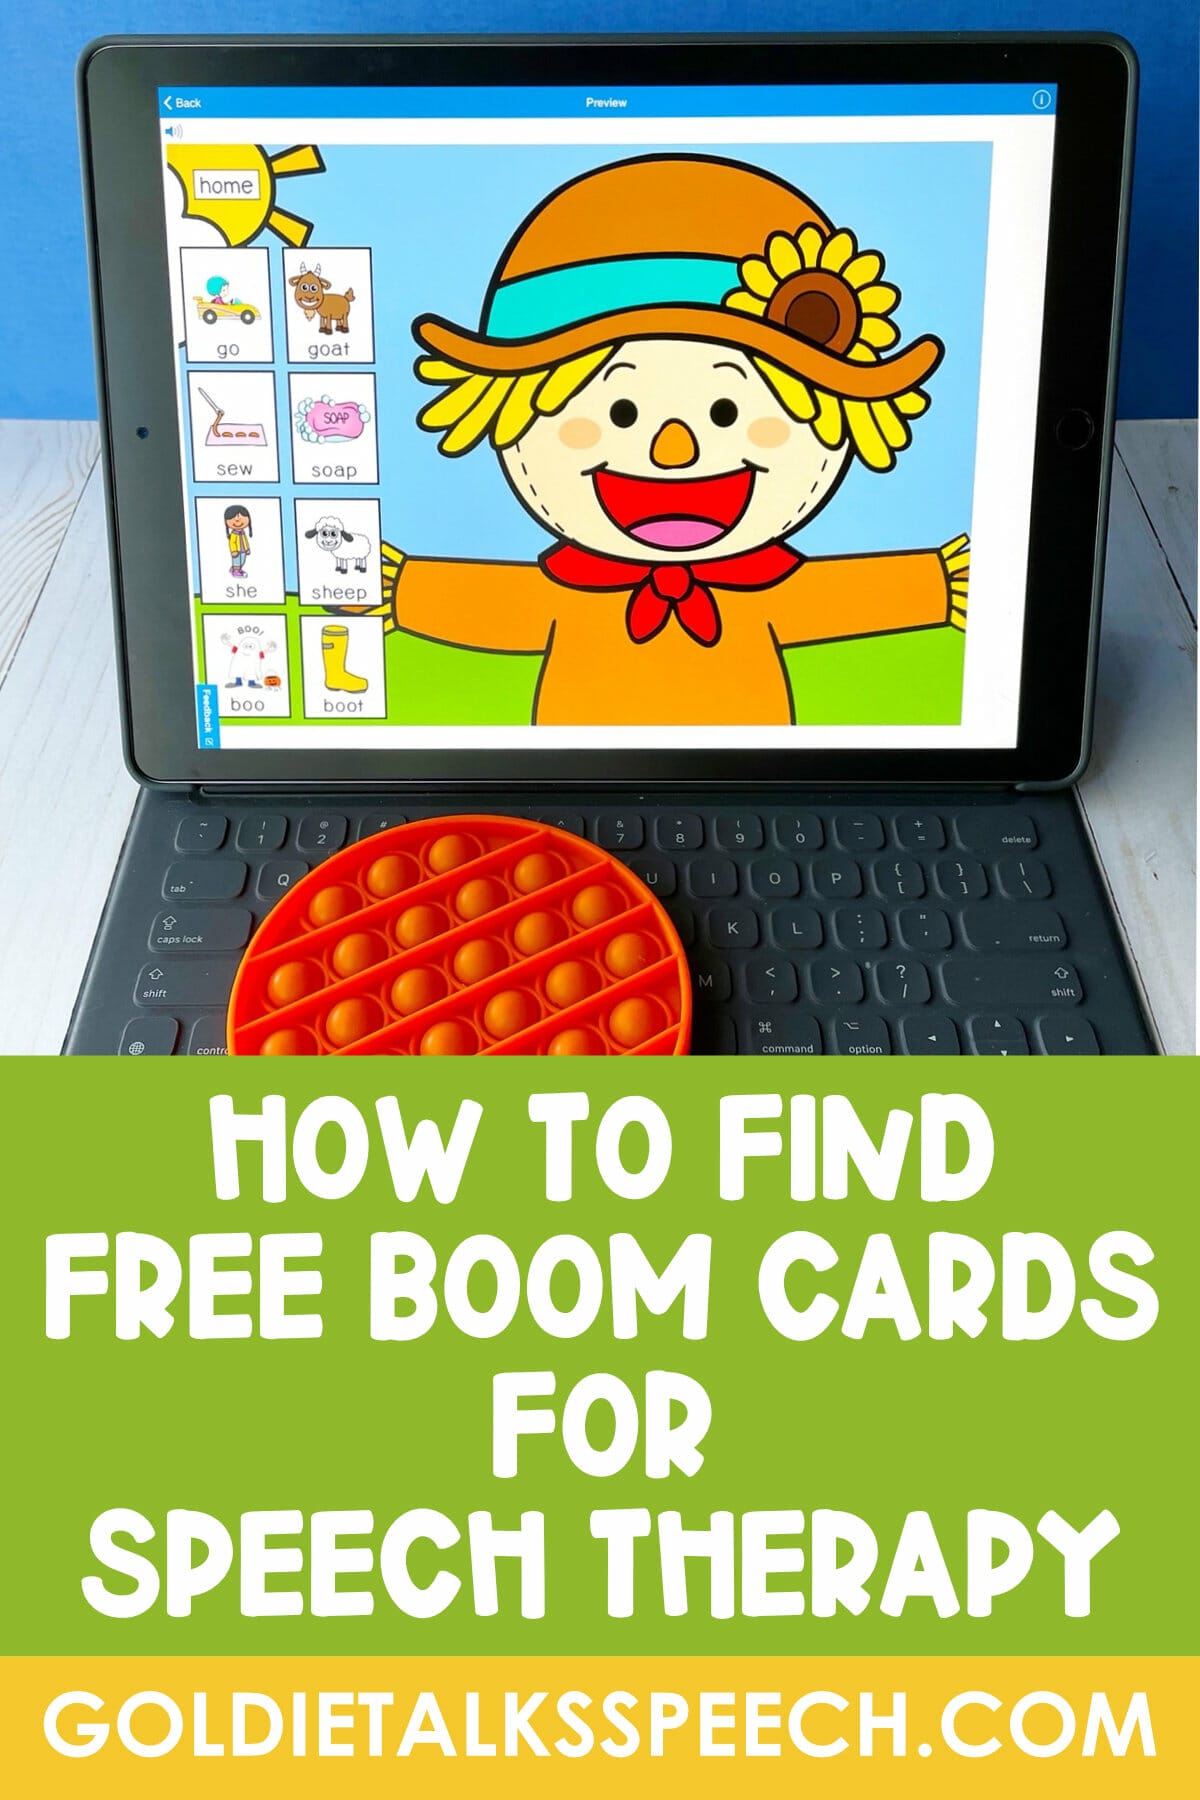 Free Boom Card for speech therapy blog post 